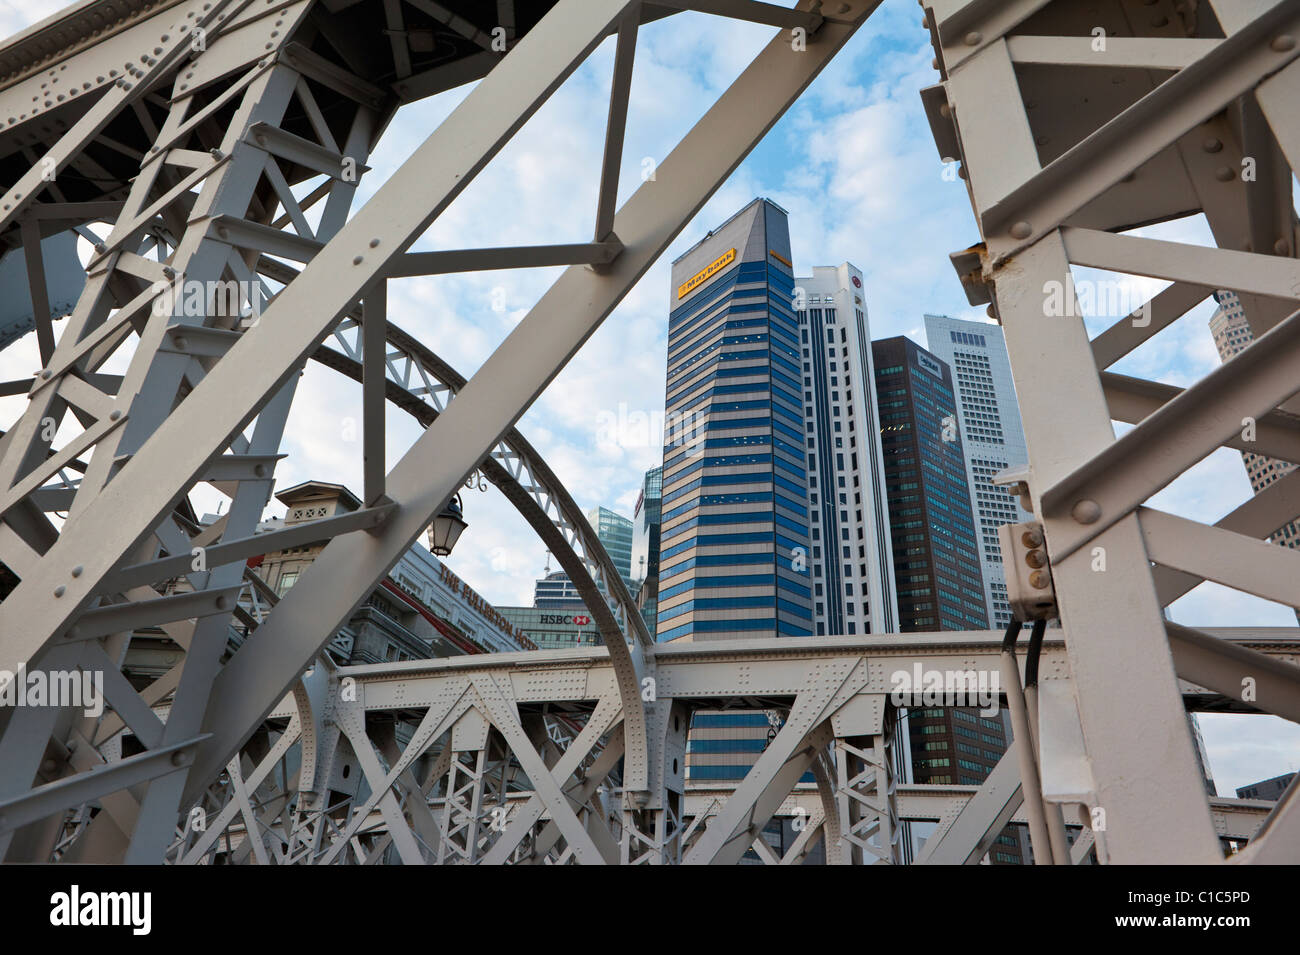 The skyline of the central business district viewed through the Anderson Bridge, Singapore Stock Photo